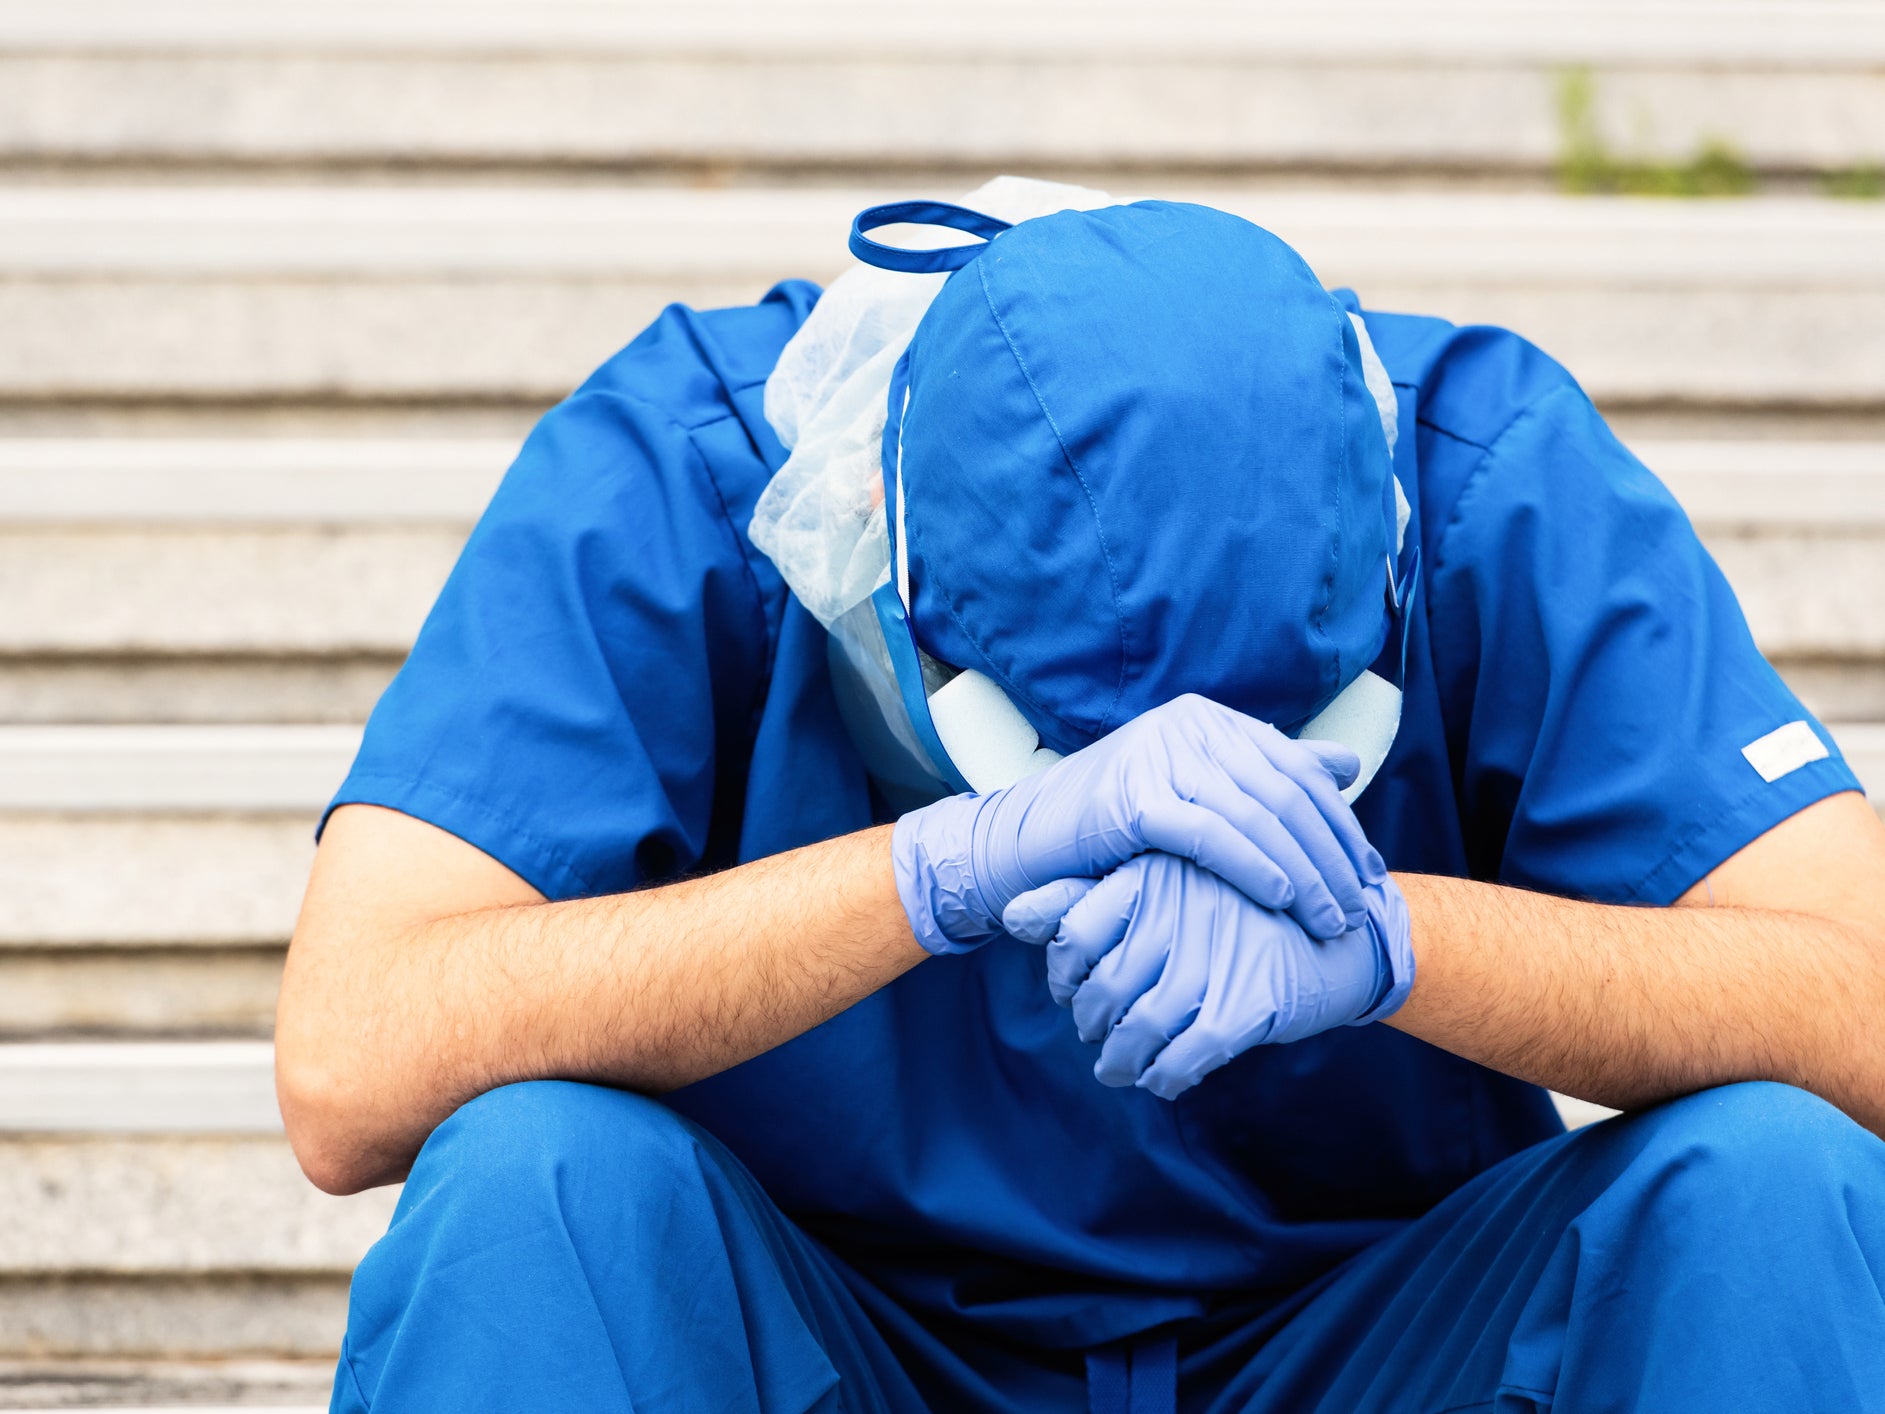 The NHS is to offer more mental health support to staff after the Covid pandemic